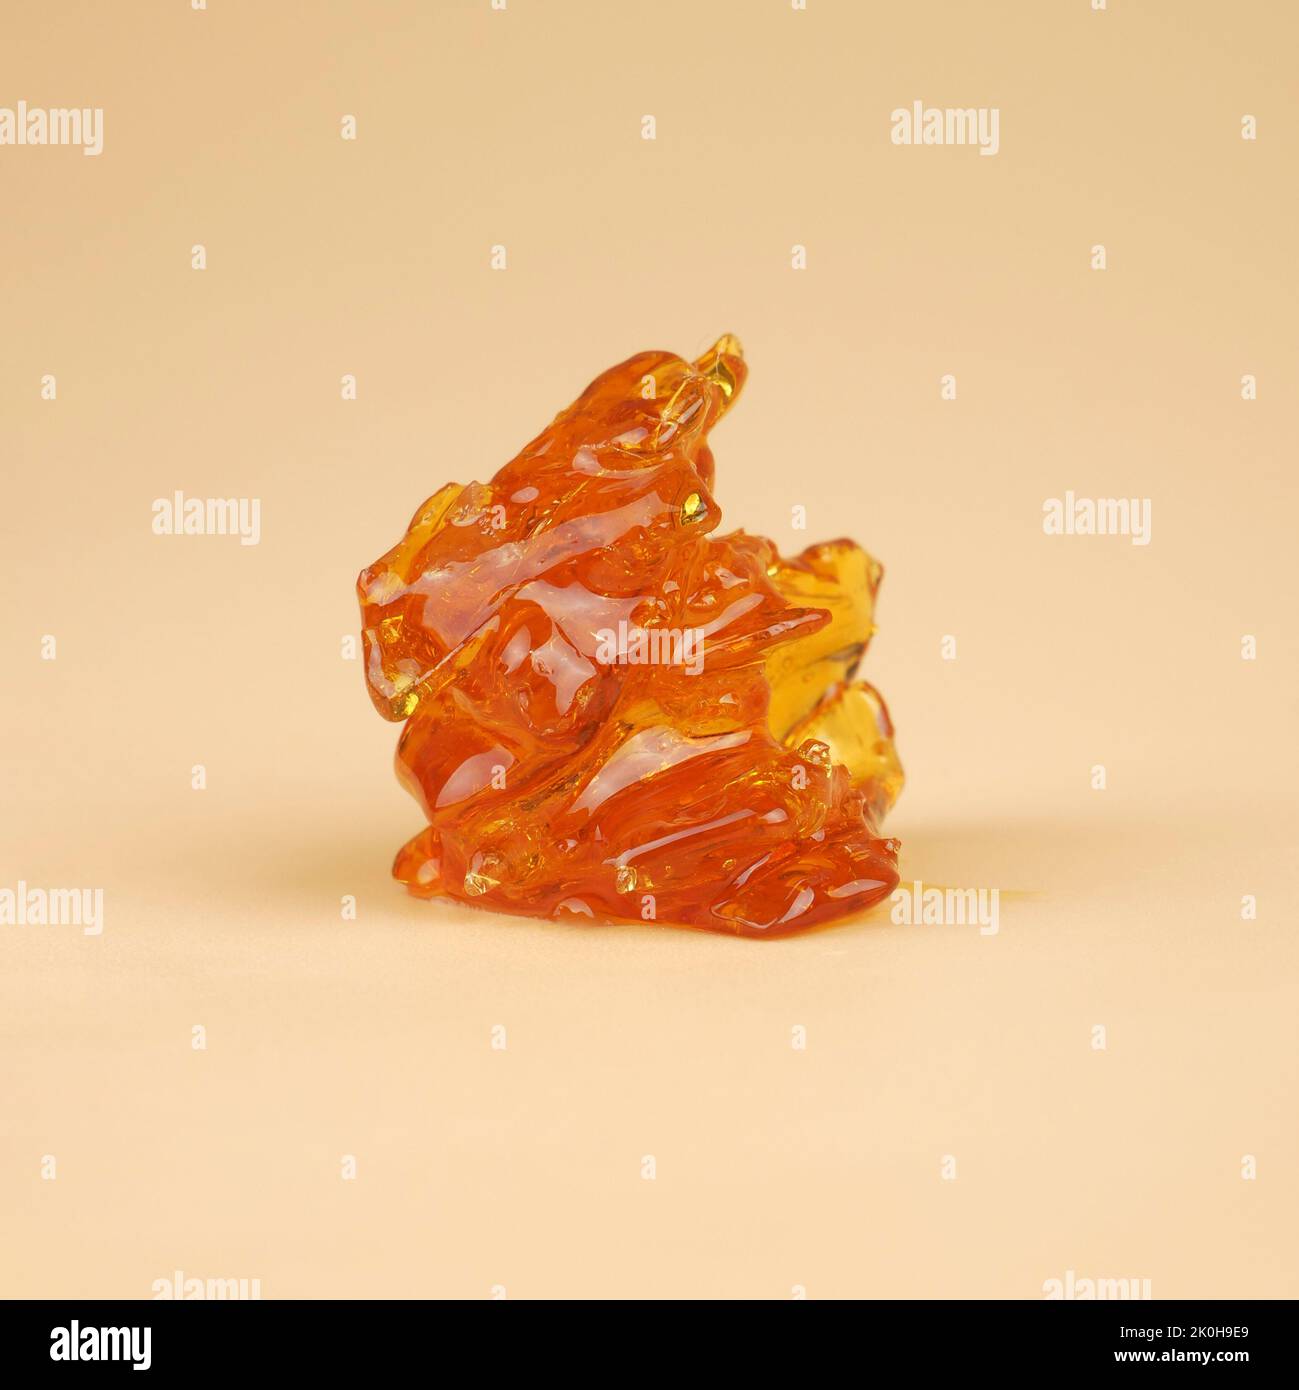 amber yellow piece of cannabis wax with high thc close up. Stock Photo